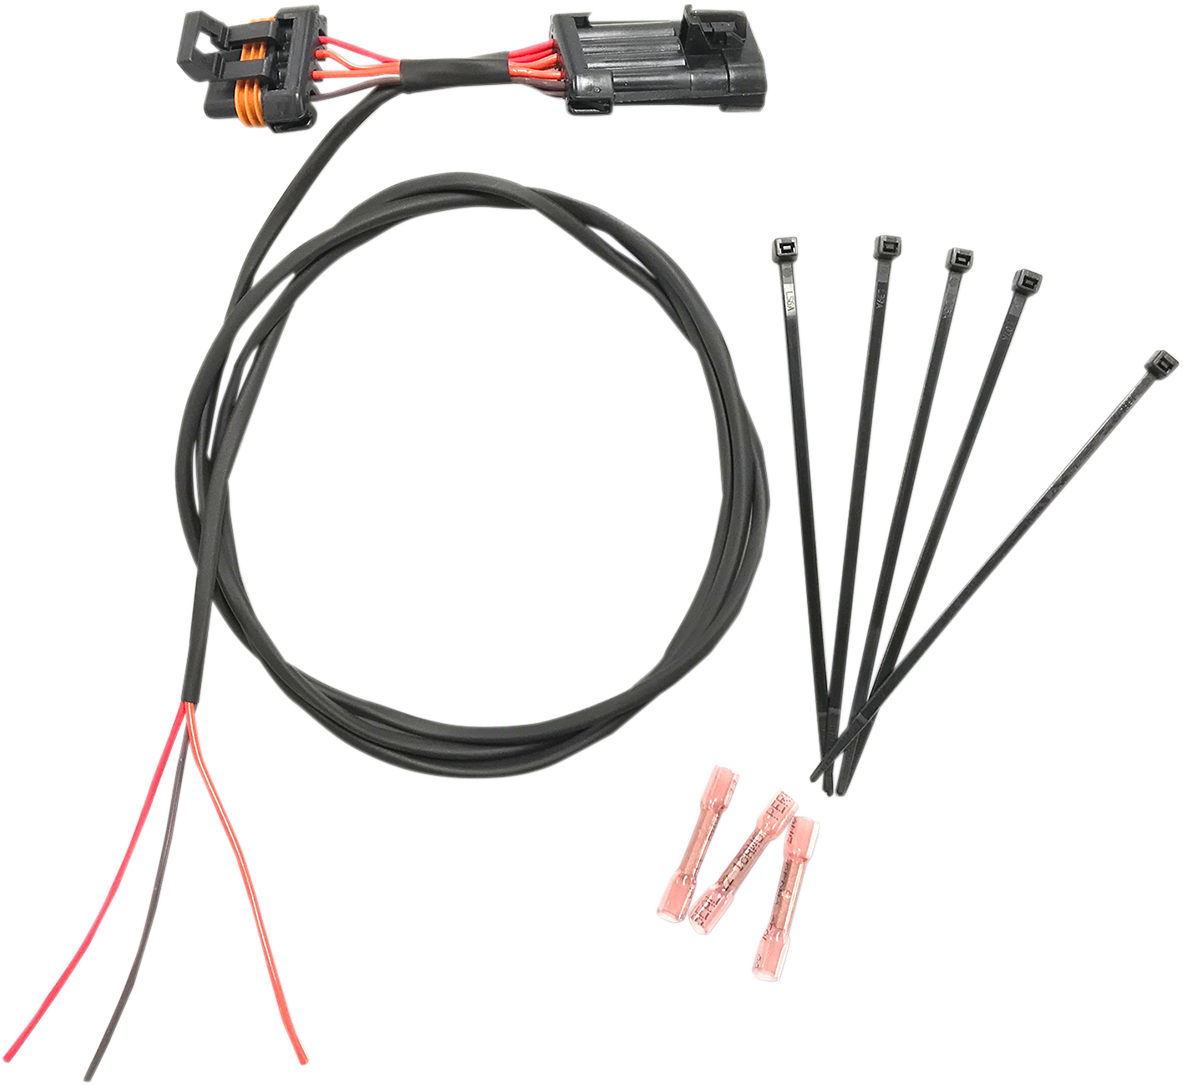 Namz Stop and Tail Light Power Out Wire Harness 2014-18 Polaris RZR XP 900 1000